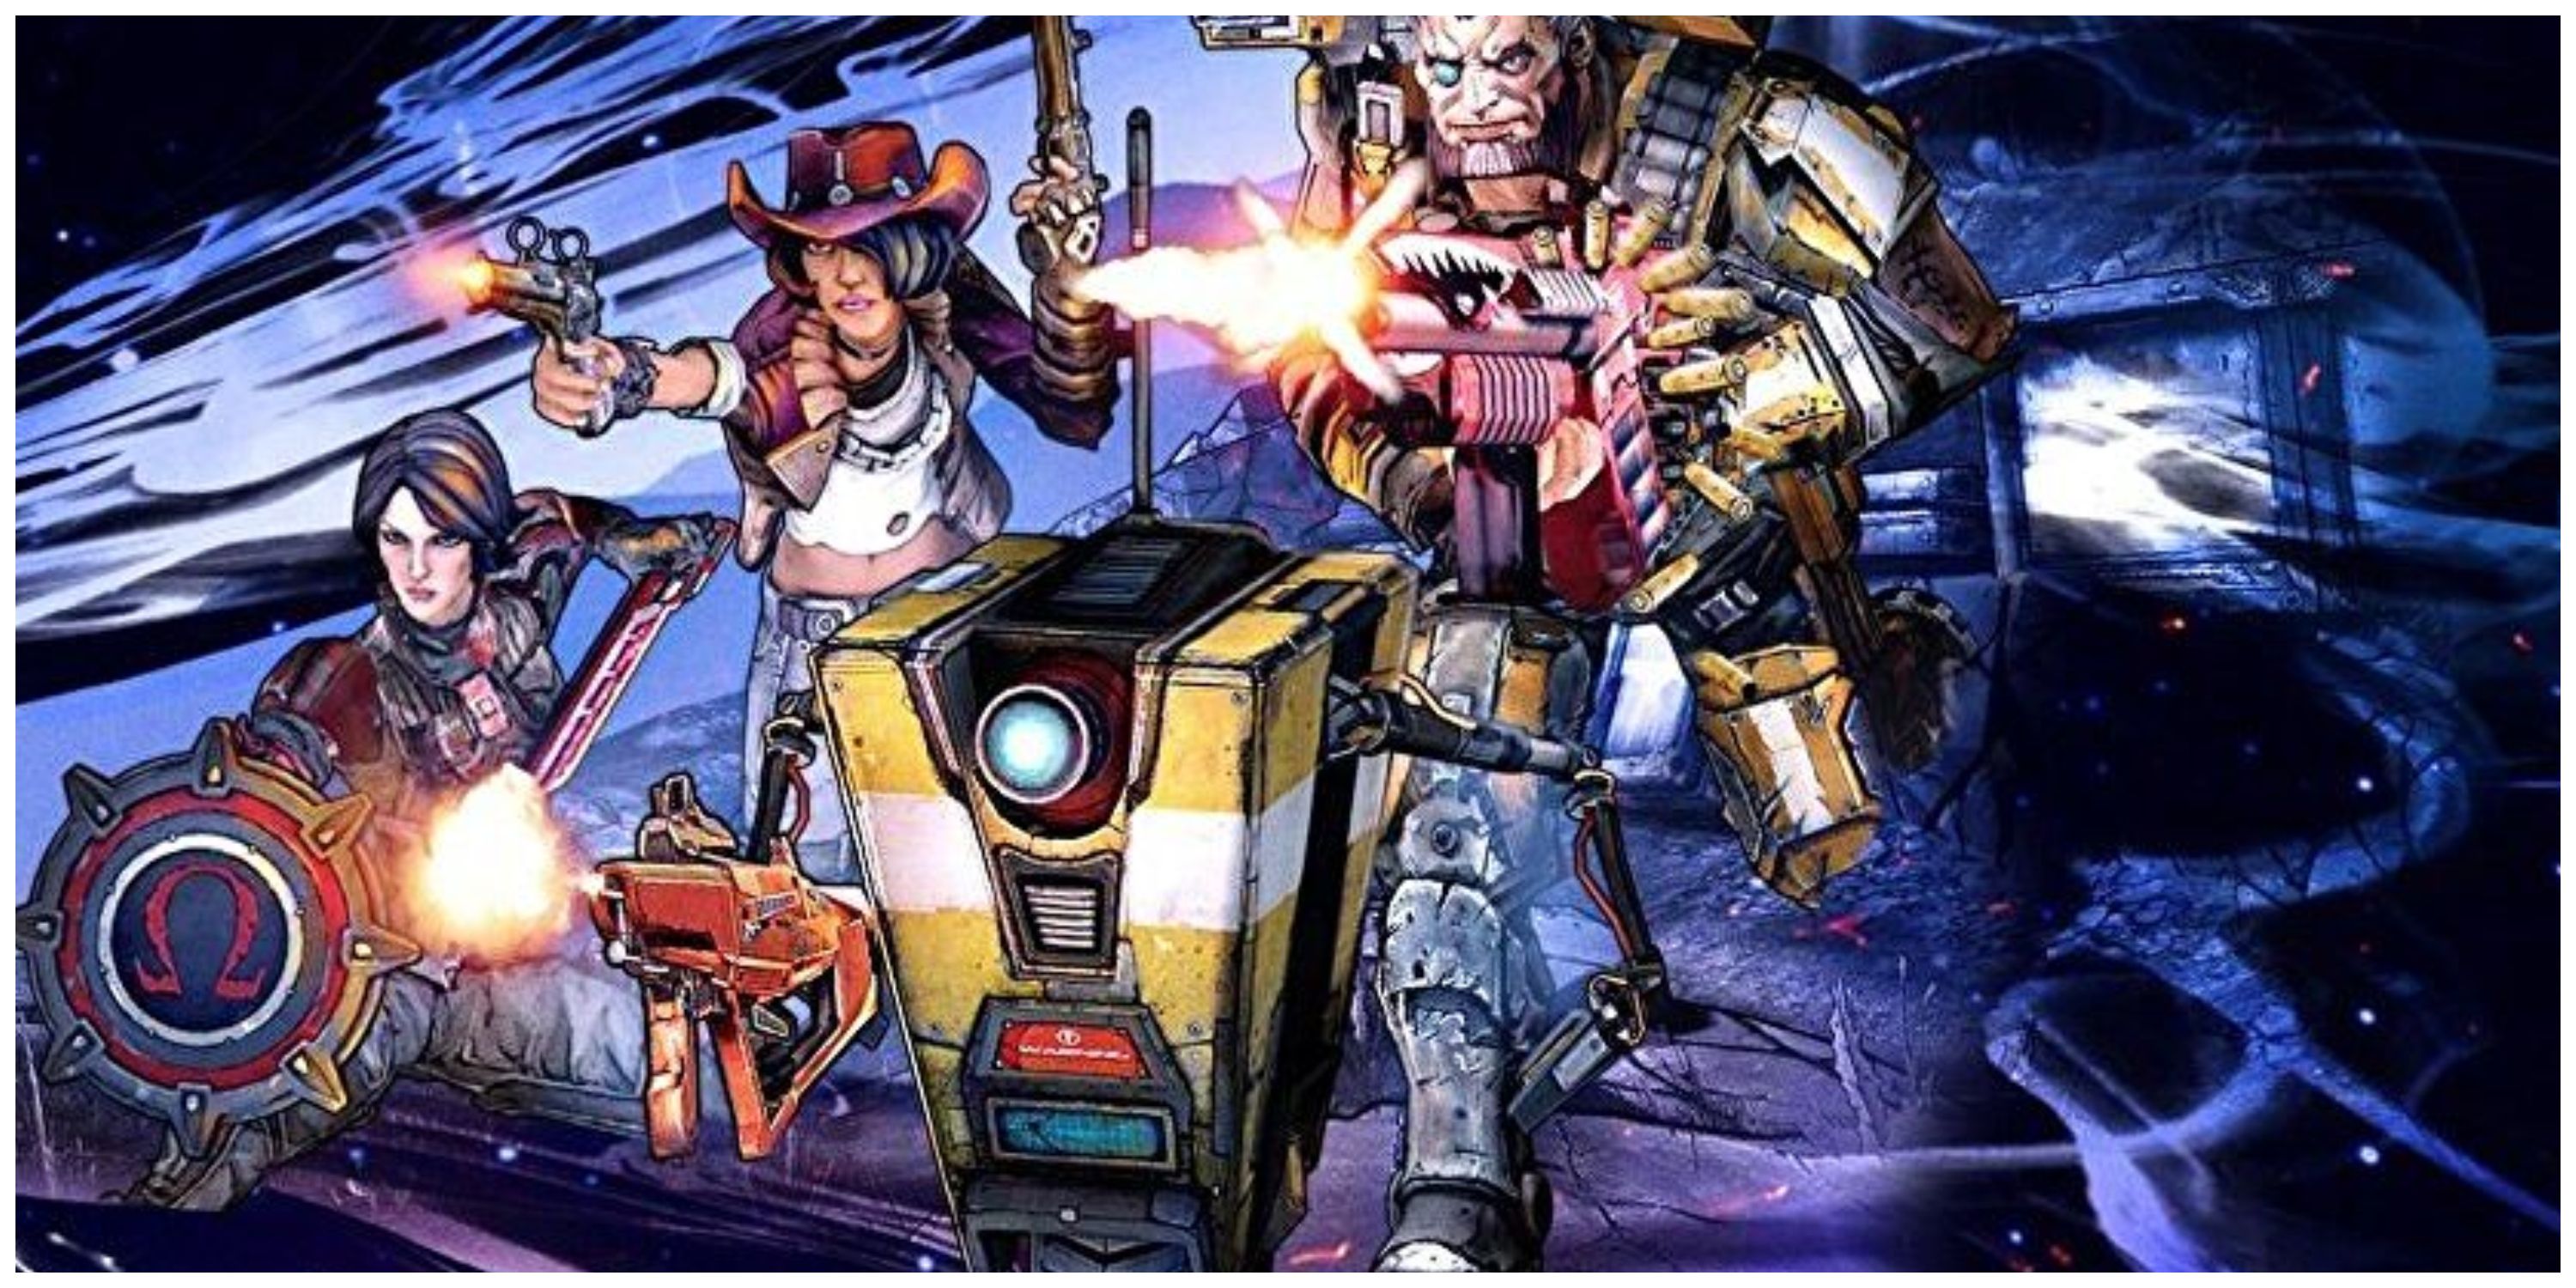  Borderlands: The Pre-Sequel characters fighting